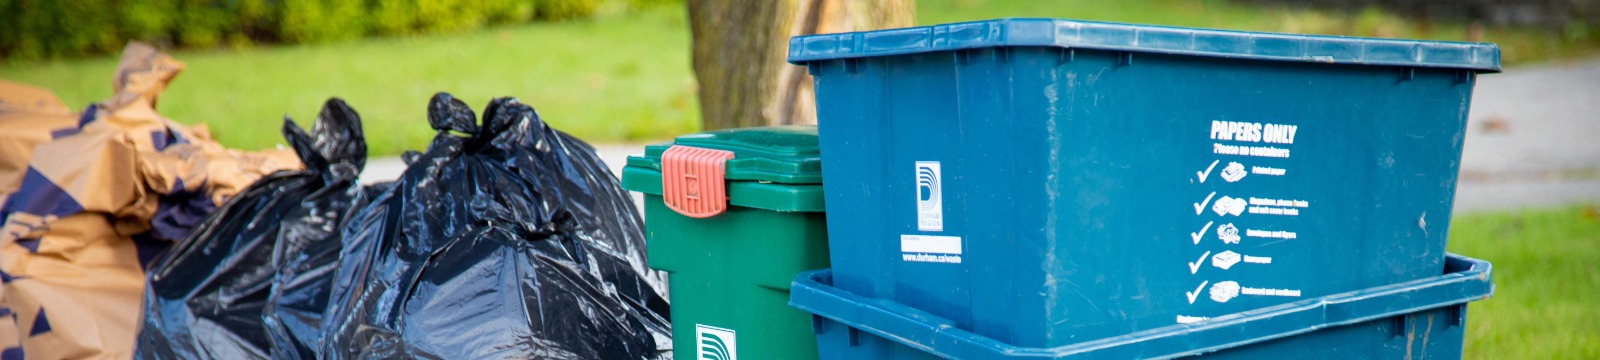 yard waste bags, garbage bags, green bin and blue boxes set out at the curb